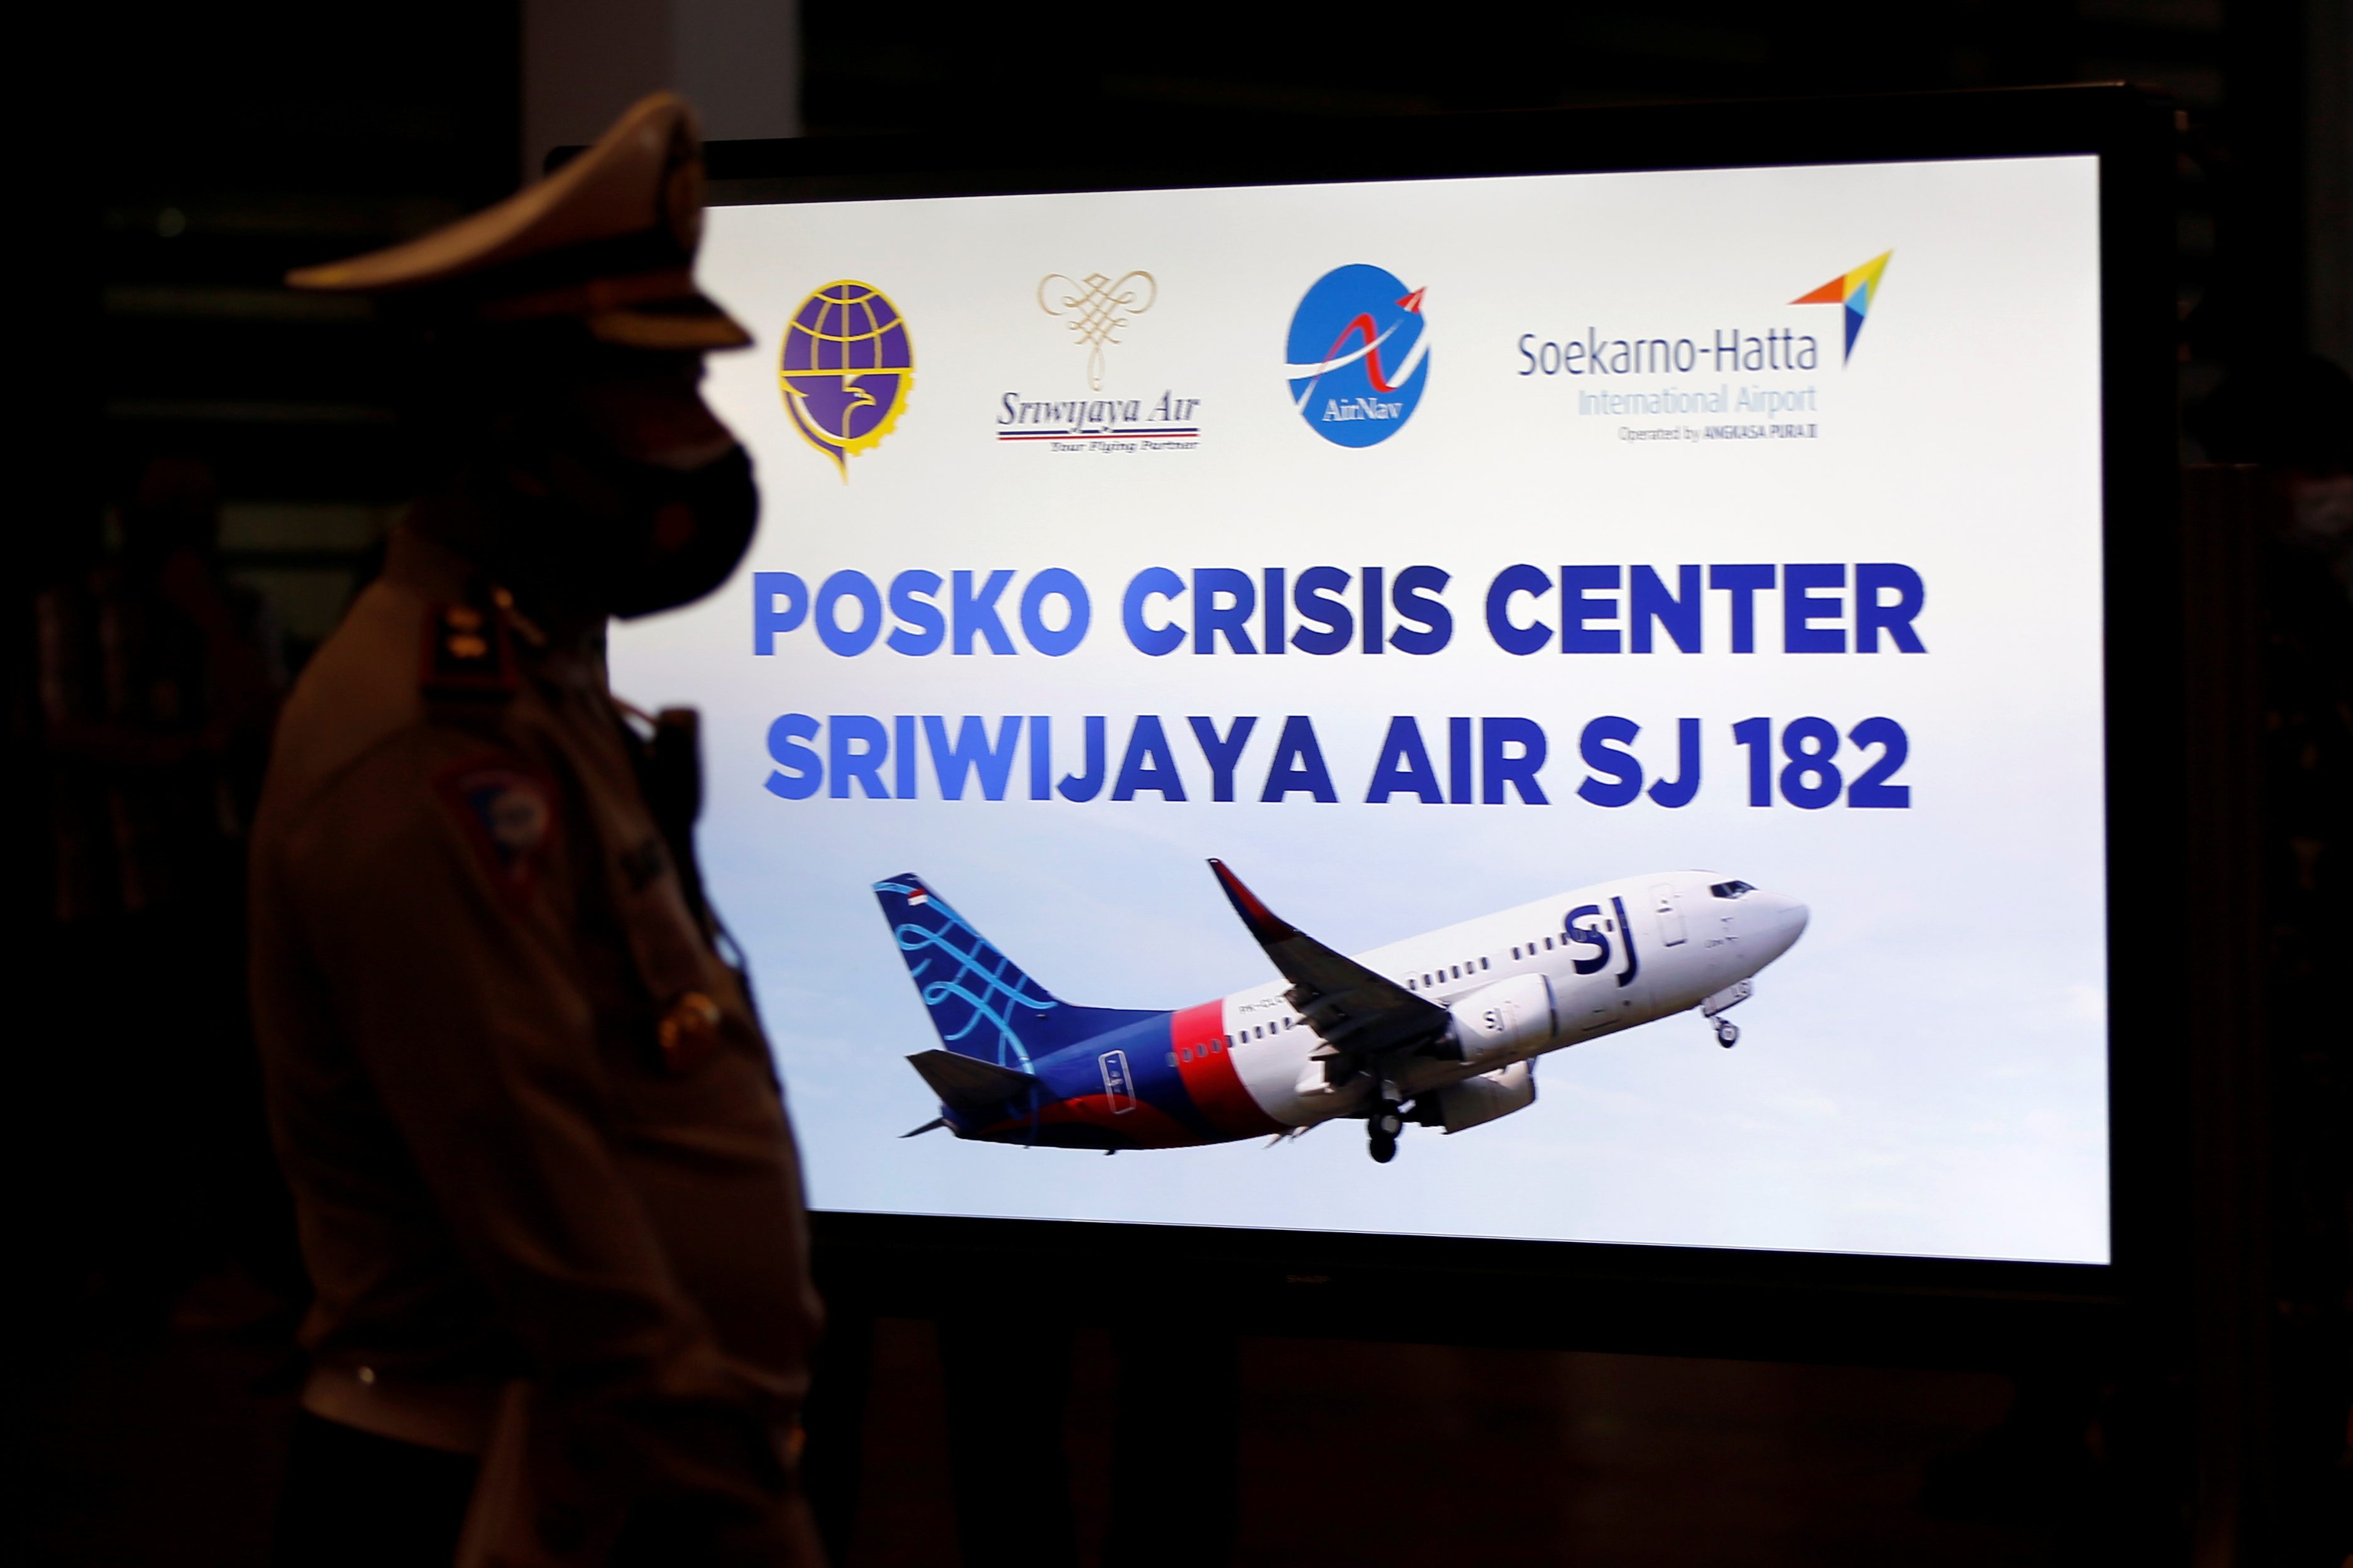 FAST FACTS: Things to know about airplane, airline in Indonesia crash